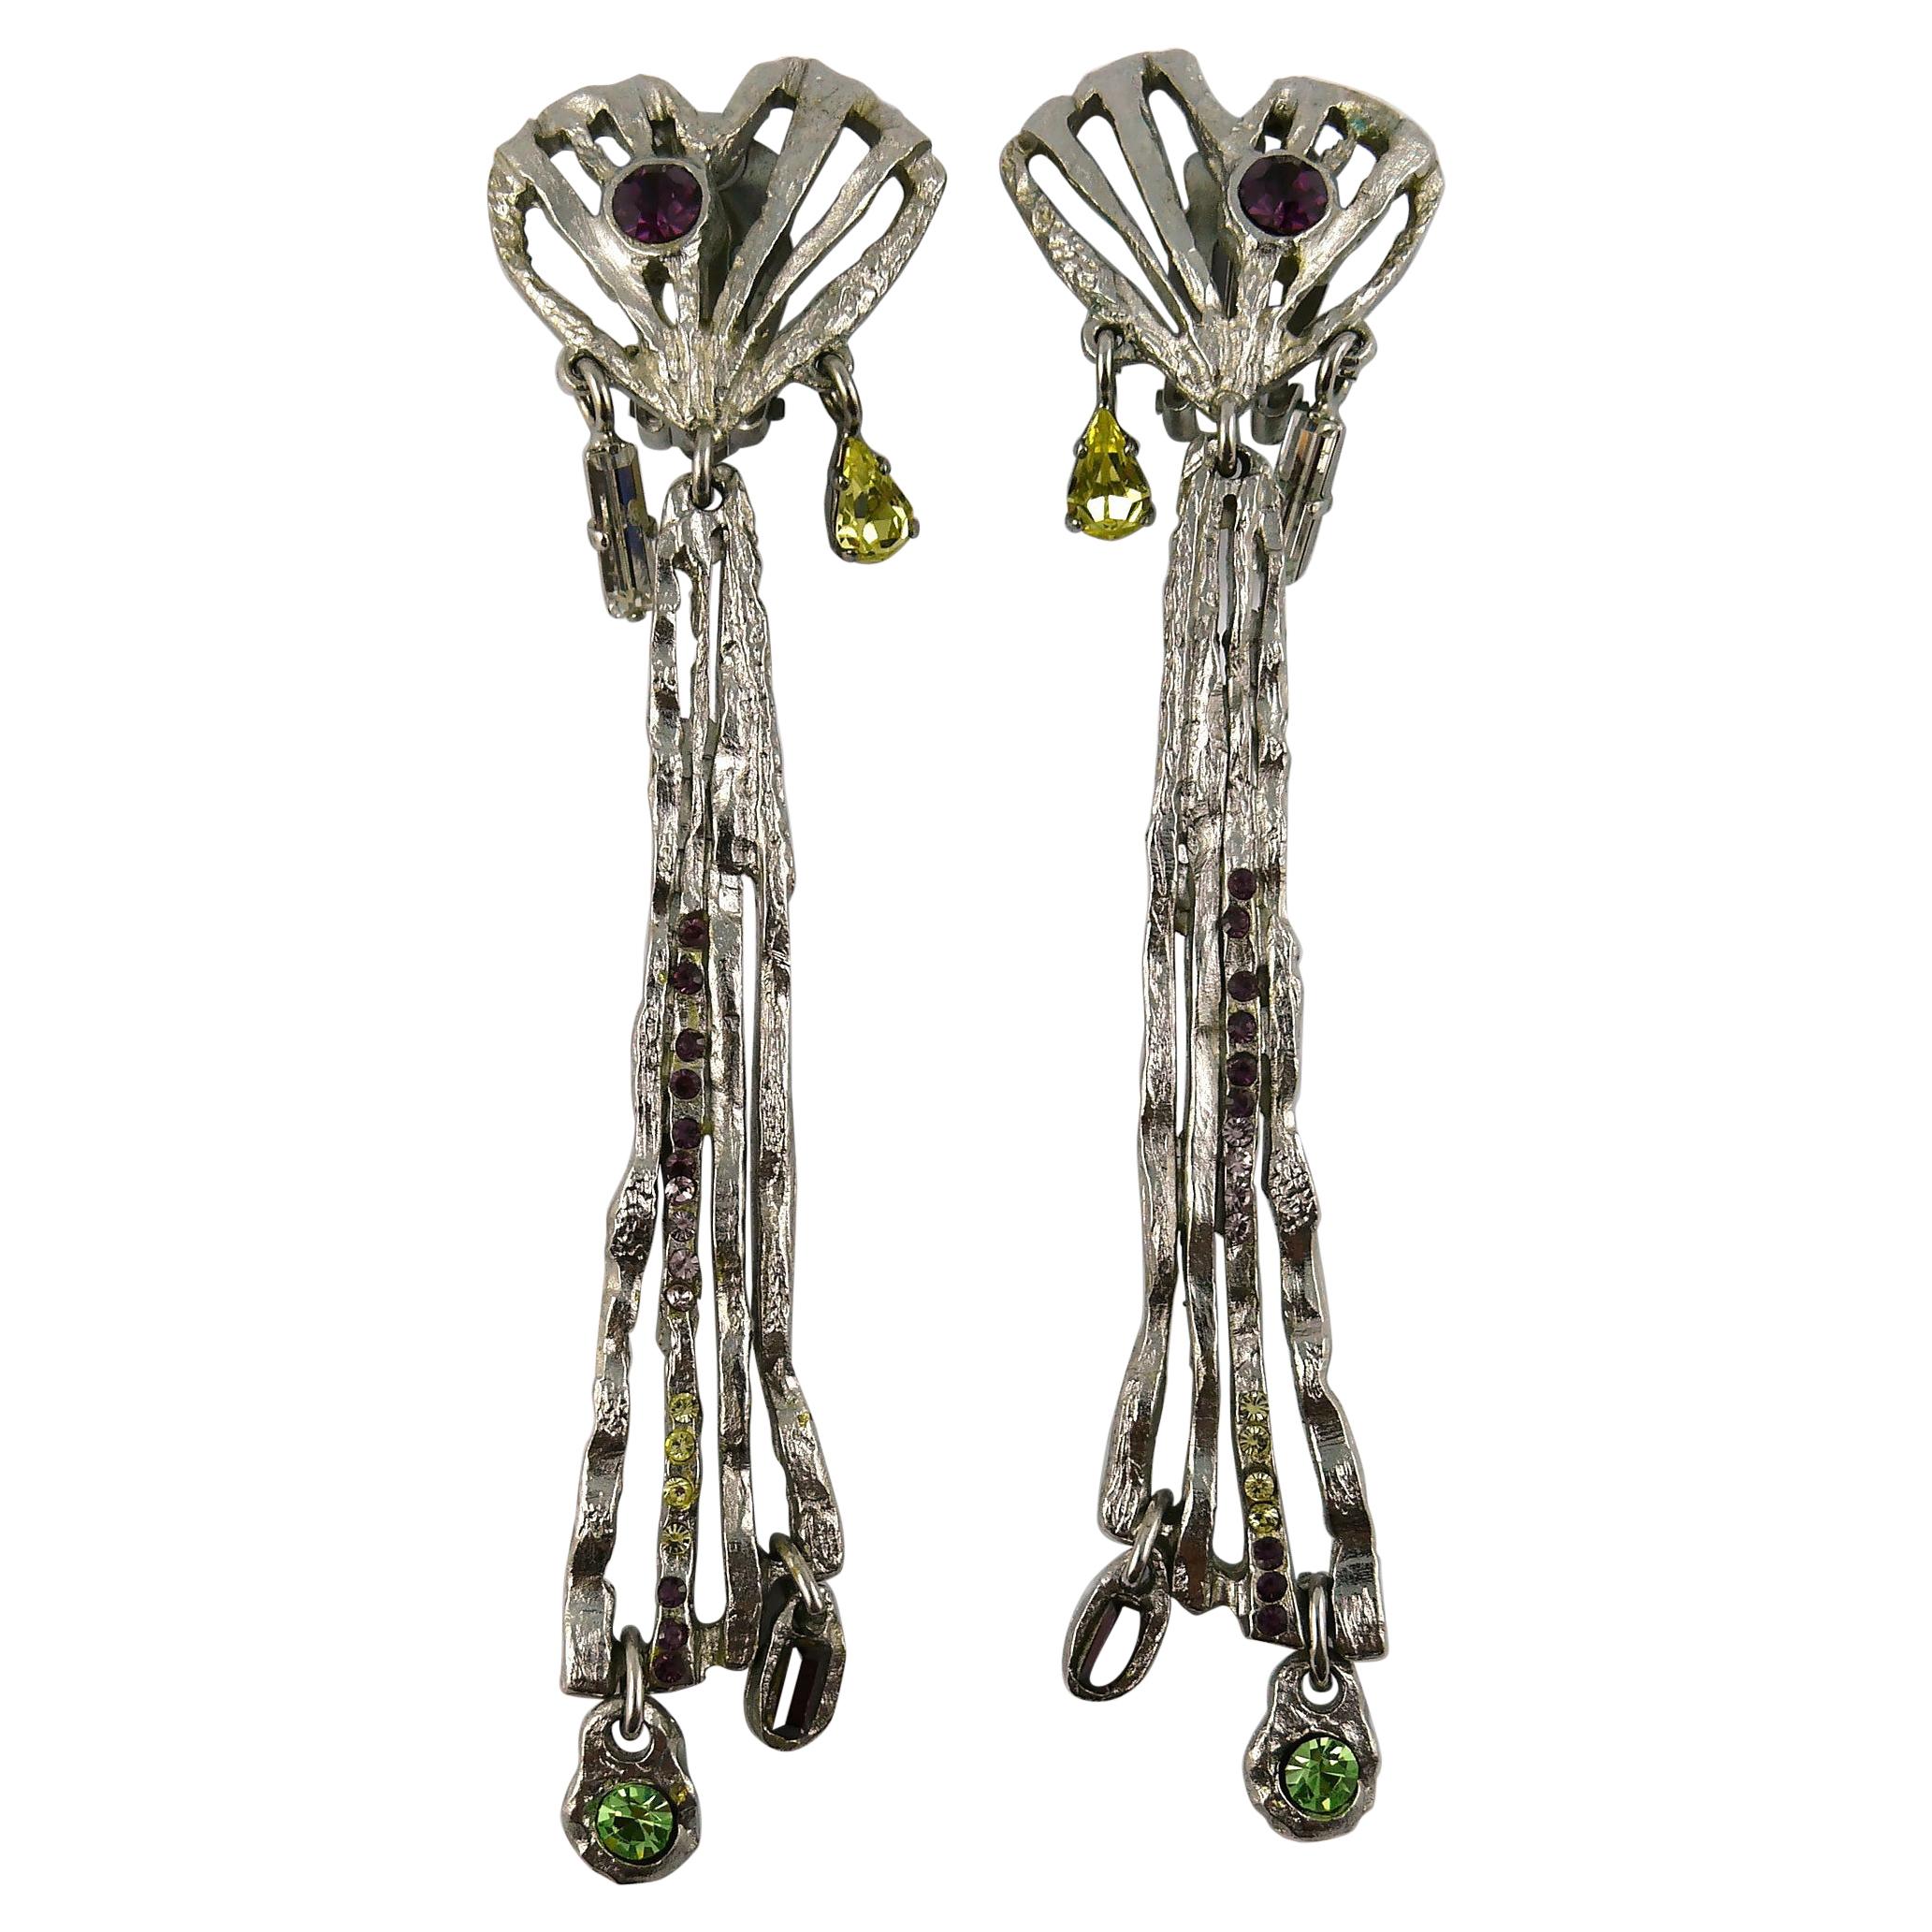 Christian Lacroix Vintage Jewelled Silver Toned Brutalist Dangling Earrings